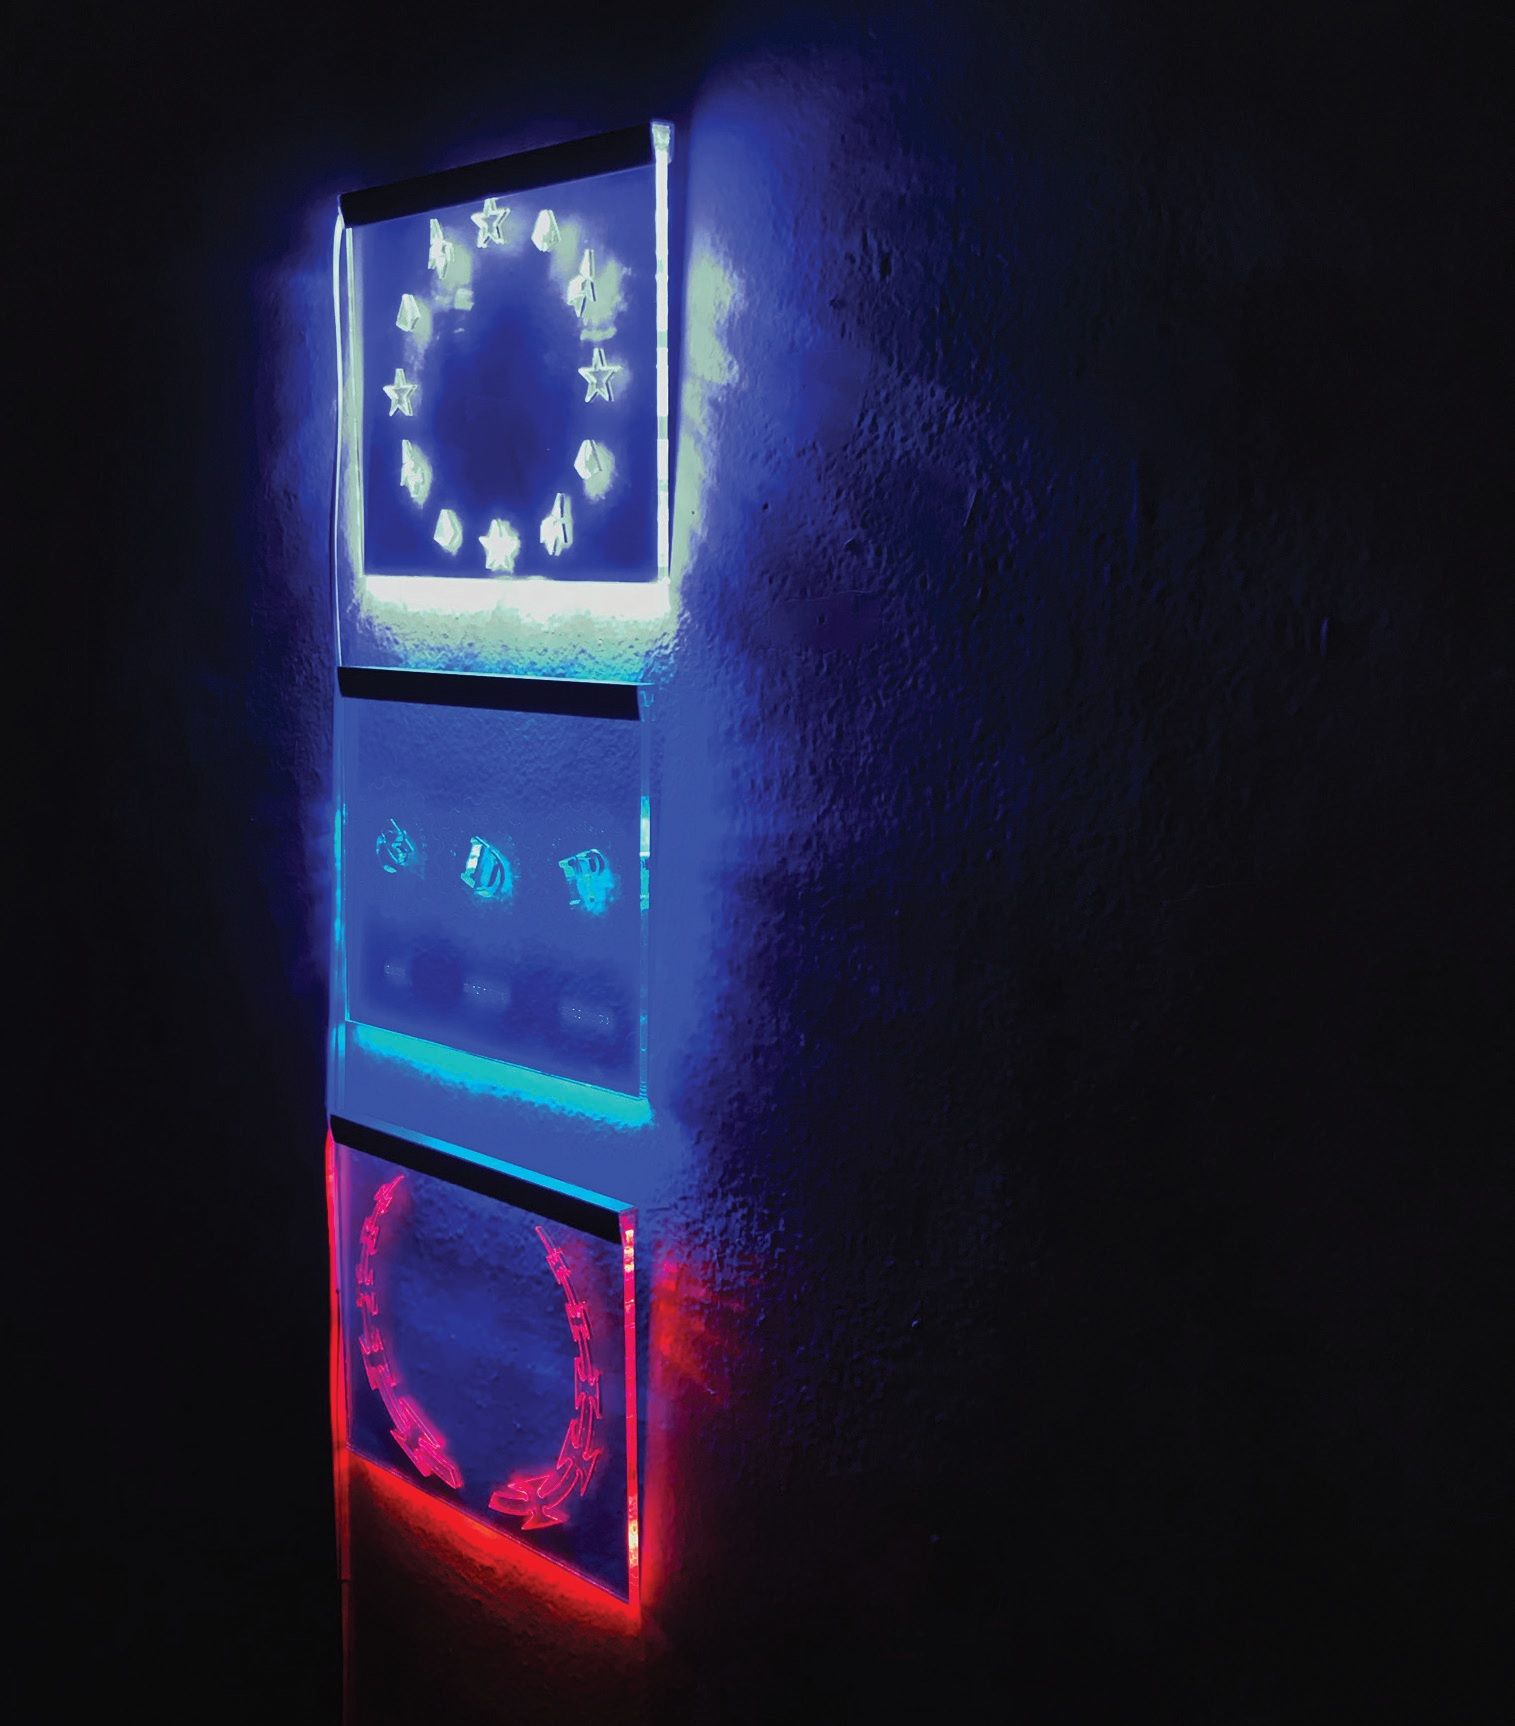 &#201;GALIT&#201;, LIBERT&#201;, FRATERNIT&#201;, 210×245mm (3 pieces), engraved plexiglass with LED lighting, 2016